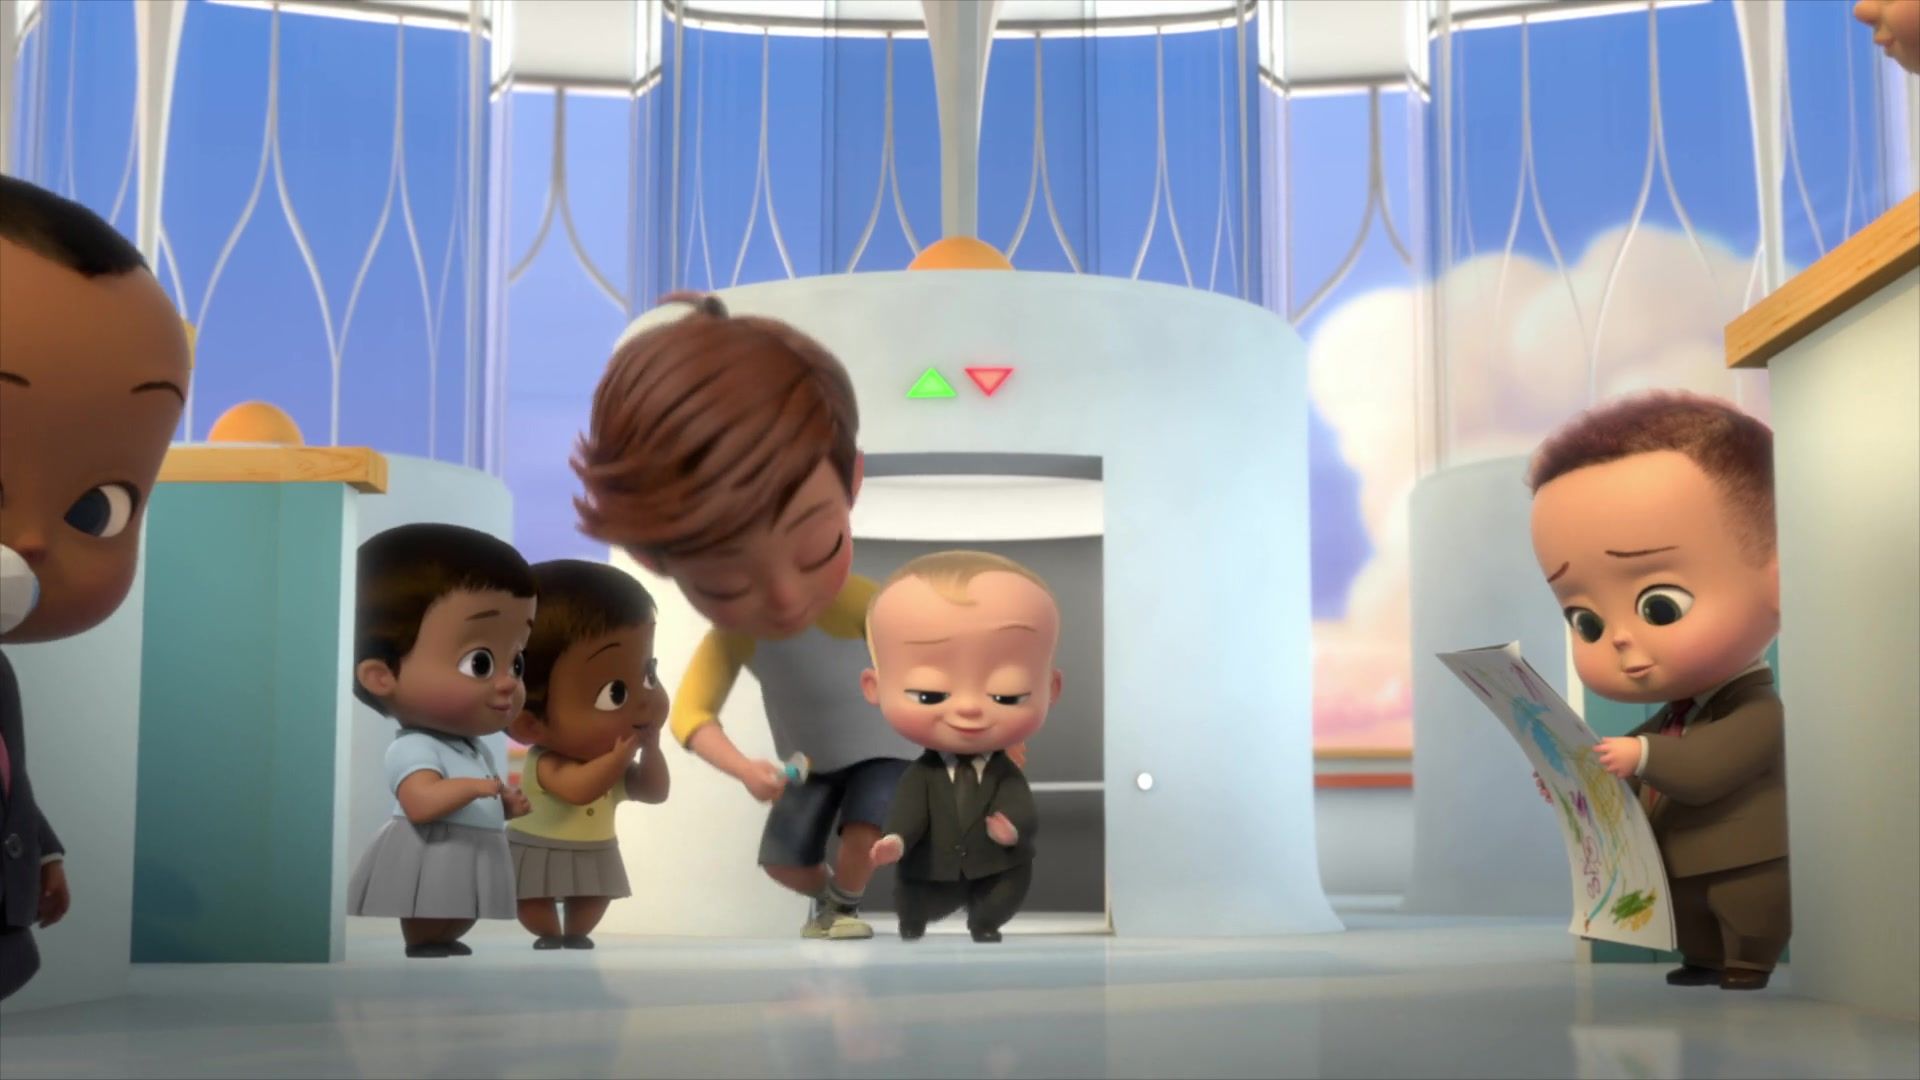 The Boss Baby: Back in Business Screencaps, Image, Screenshots, Wallpaper, & Picture